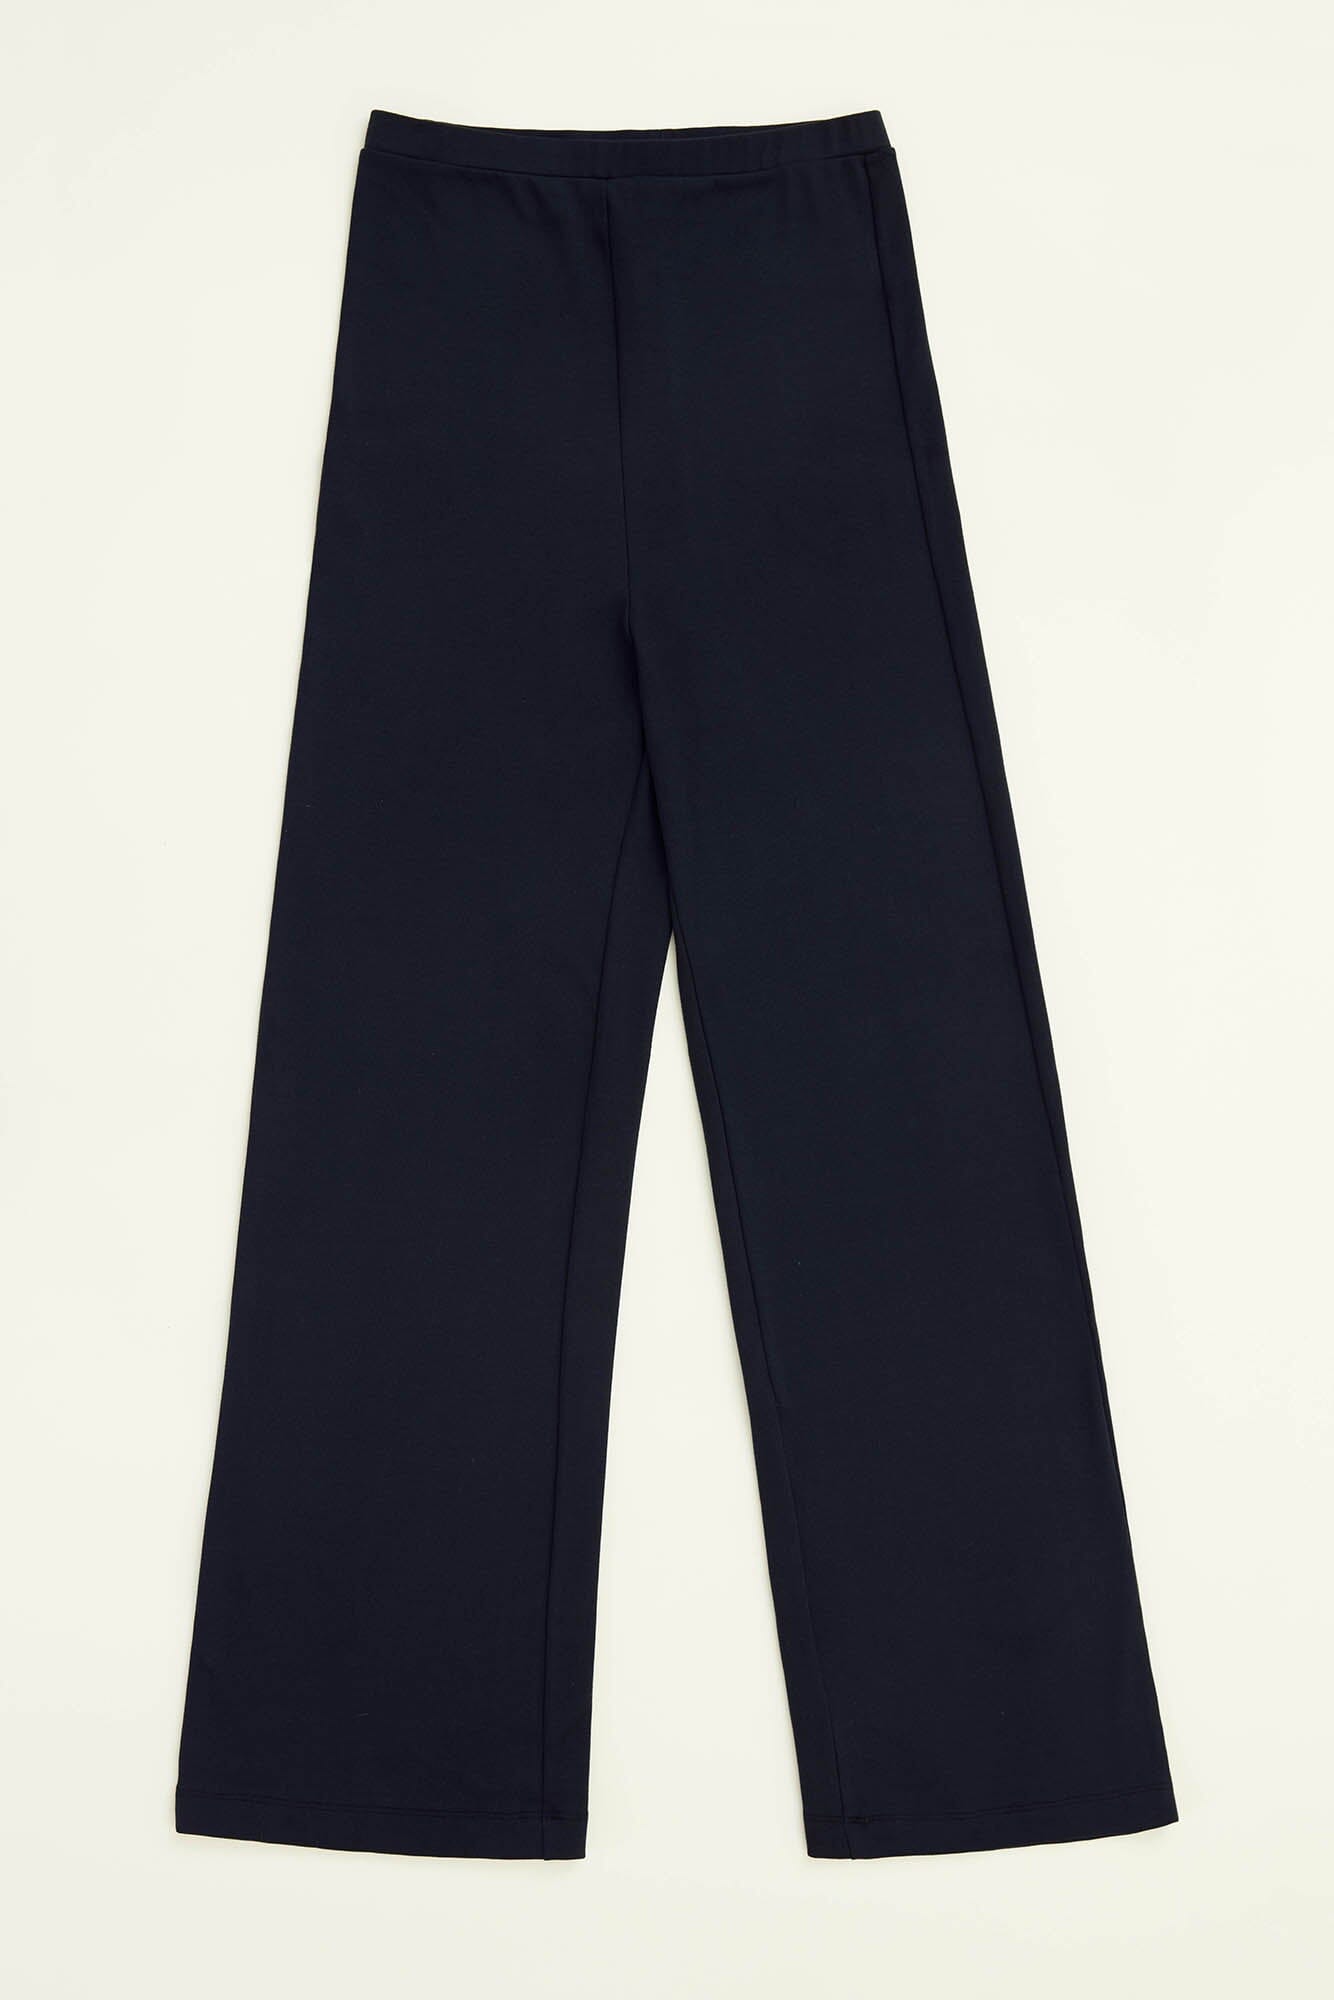 Navy Black Zahra Over Belly Maternity Pant by M Street